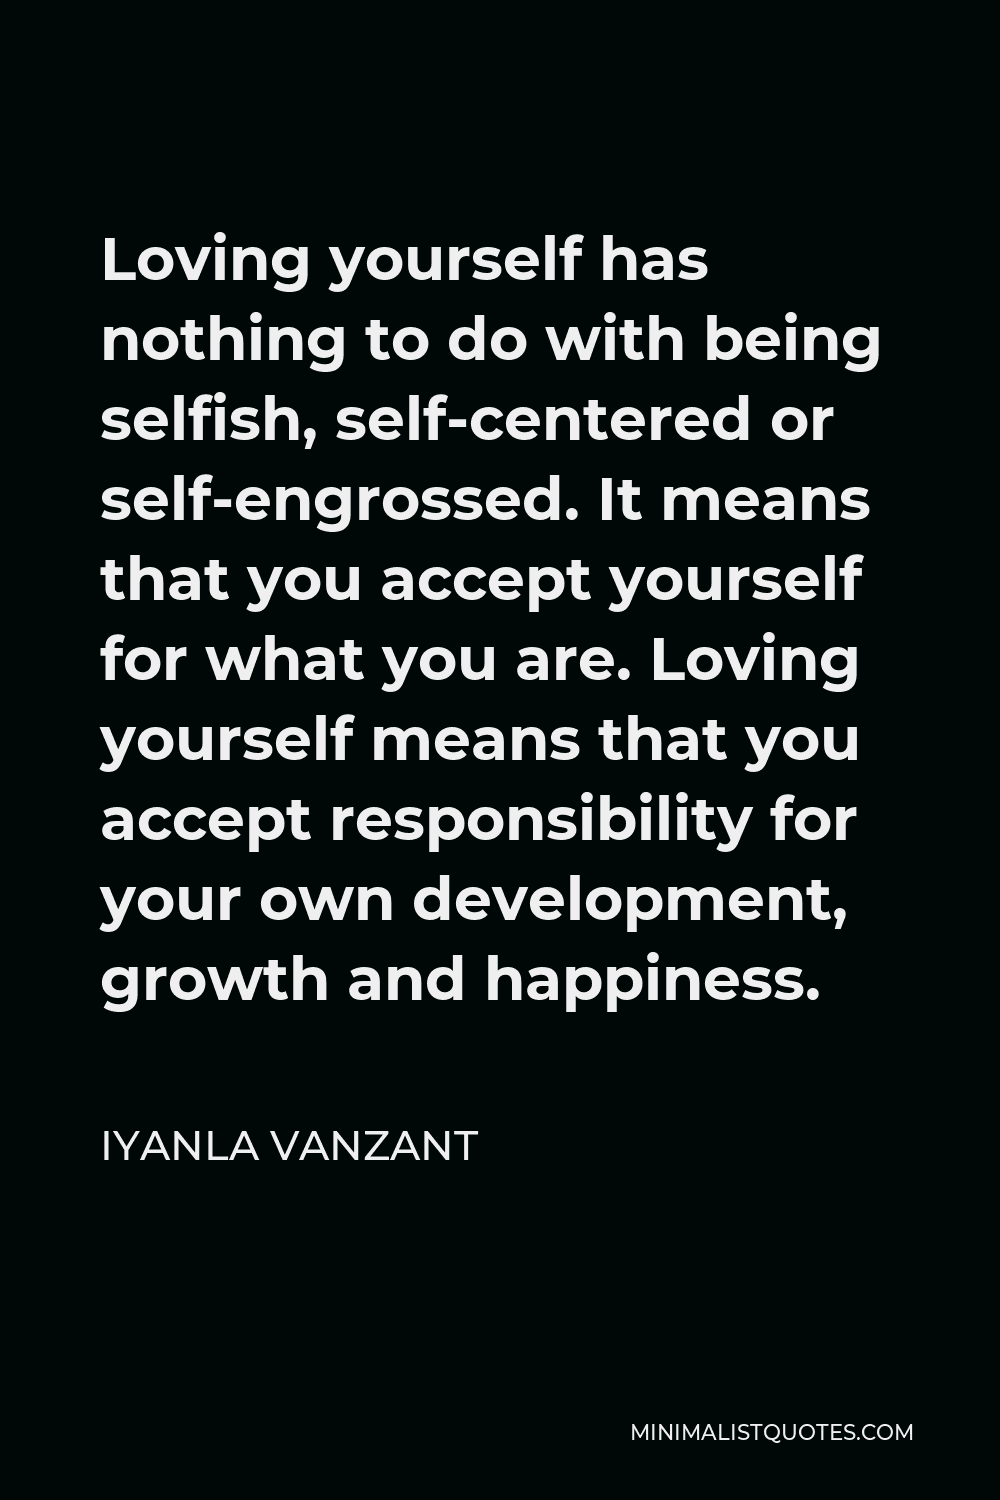 Iyanla Vanzant Quote - Loving yourself has nothing to do with being selfish, self-centered or self-engrossed. It means that you accept yourself for what you are. Loving yourself means that you accept responsibility for your own development, growth and happiness.